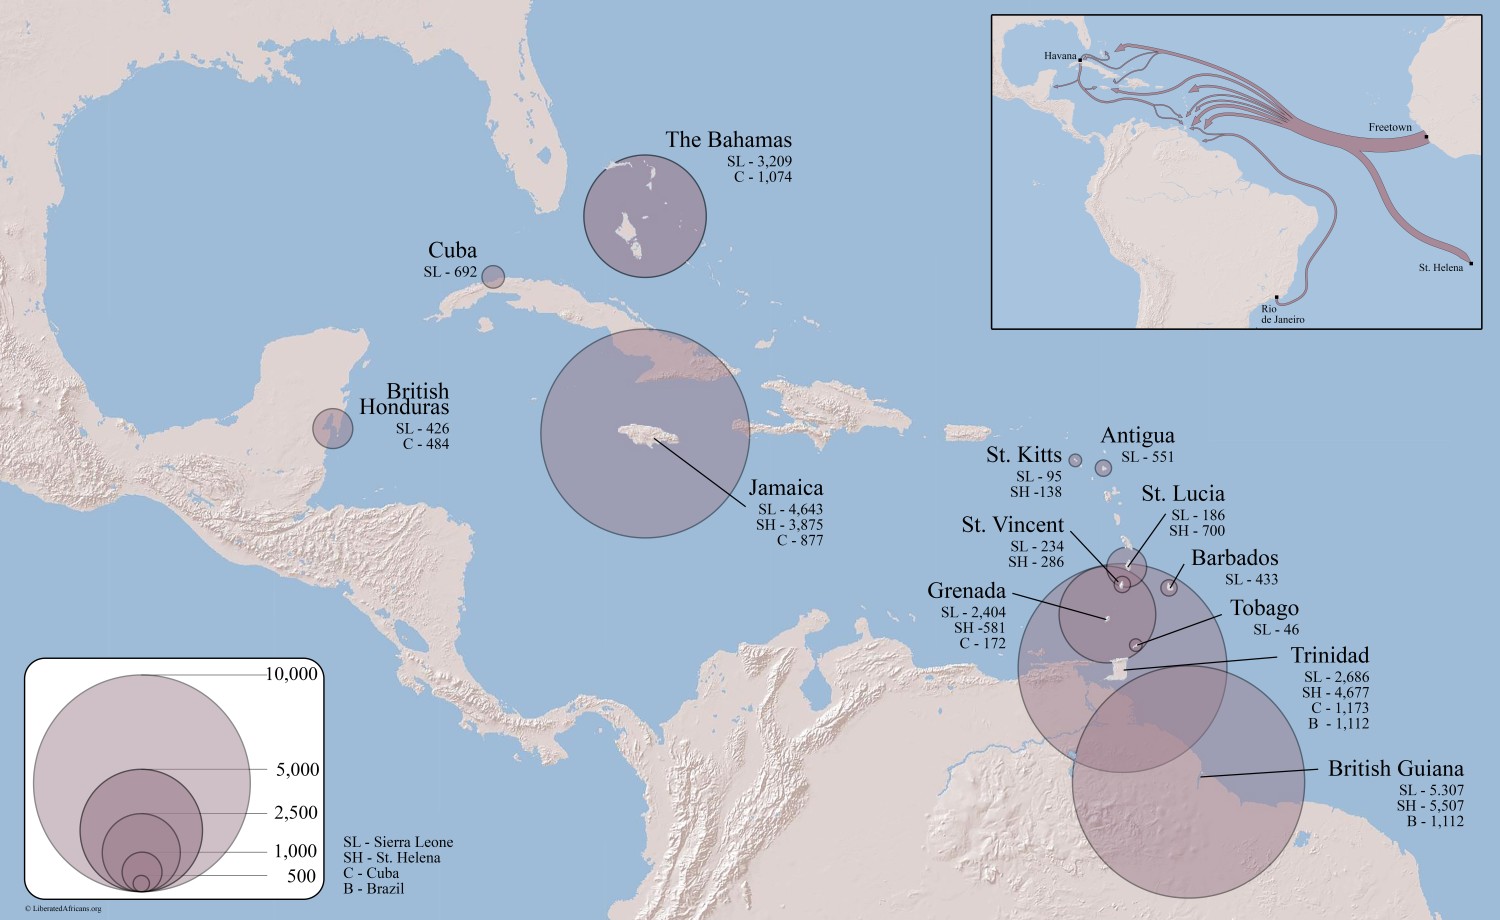 Map Showing Settlements of "Liberated Africans" from Sierra Leone, St. Helena, Cuba and Brazil in the British Caribbean after Emancipation in 1833